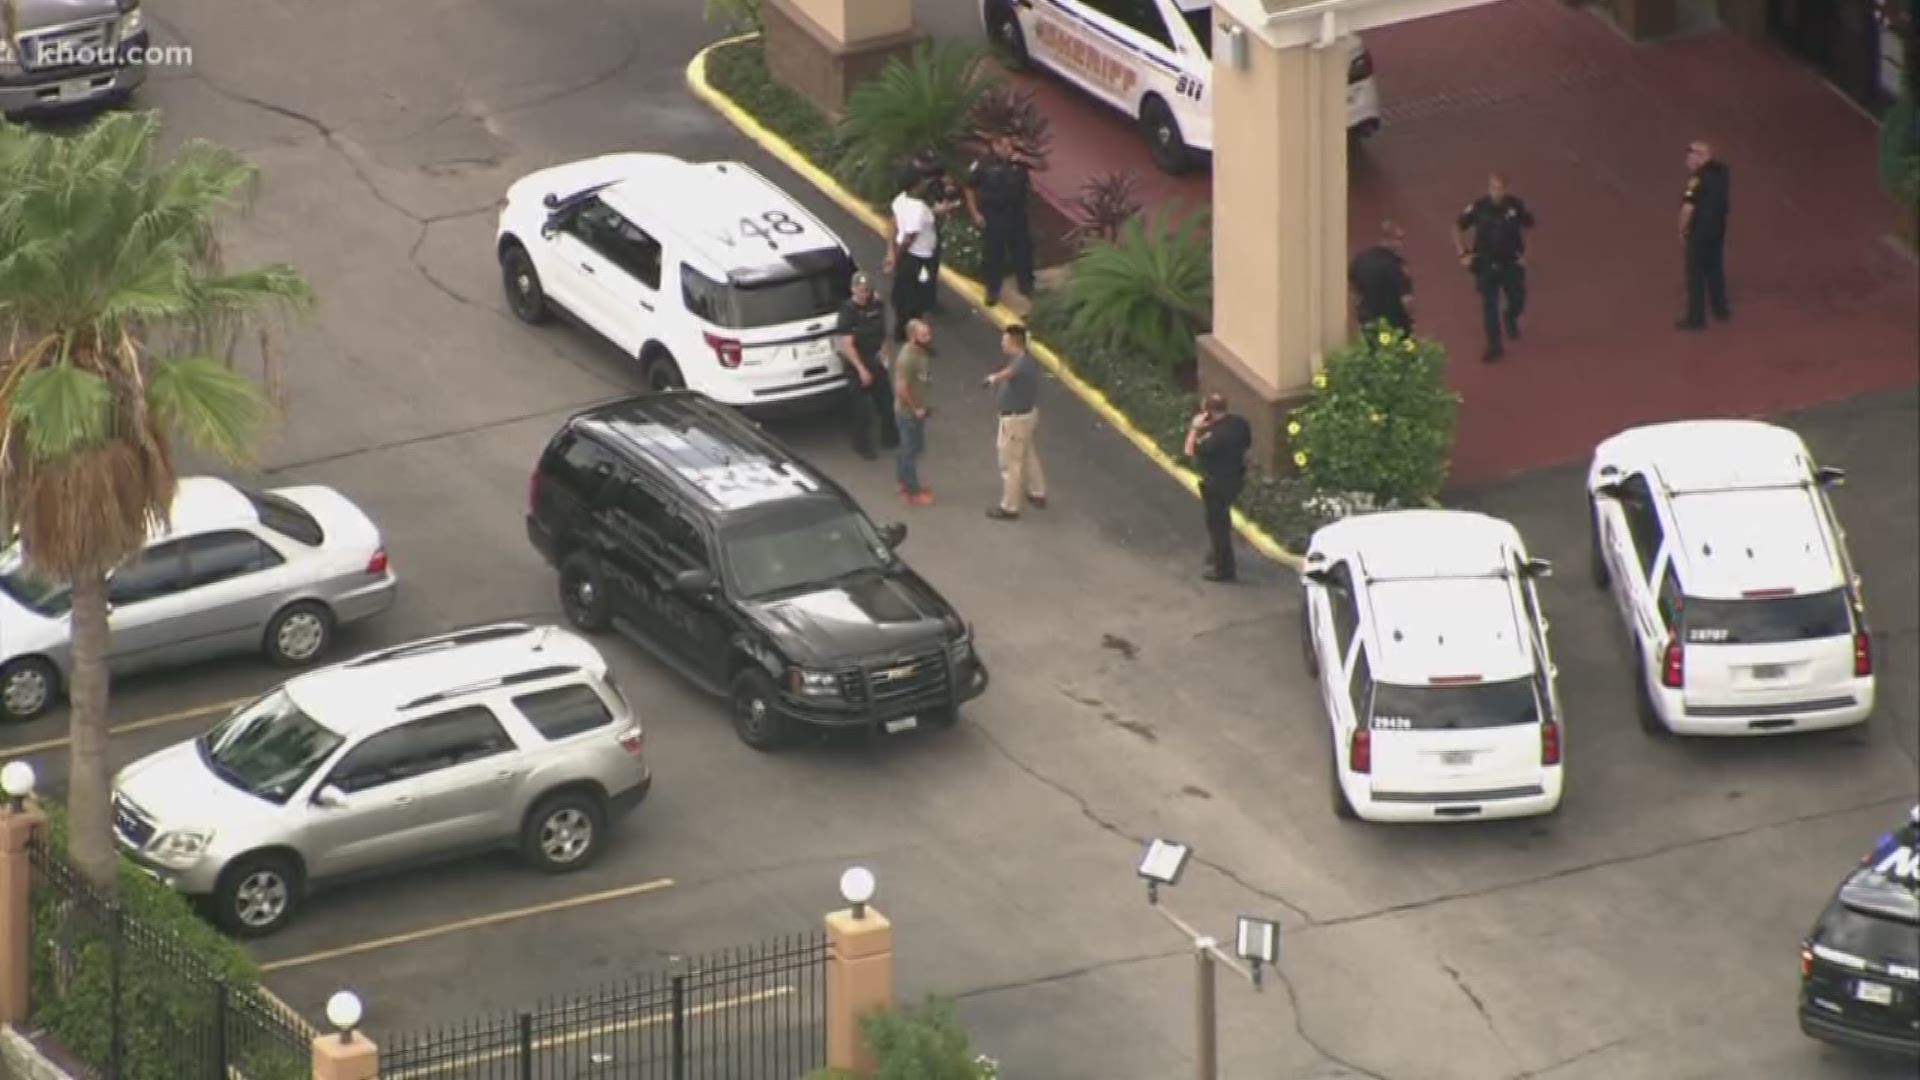 Police have surrounded businesses and a hotel in southwest Houston near the Southwest Freeway and Hillcroft.